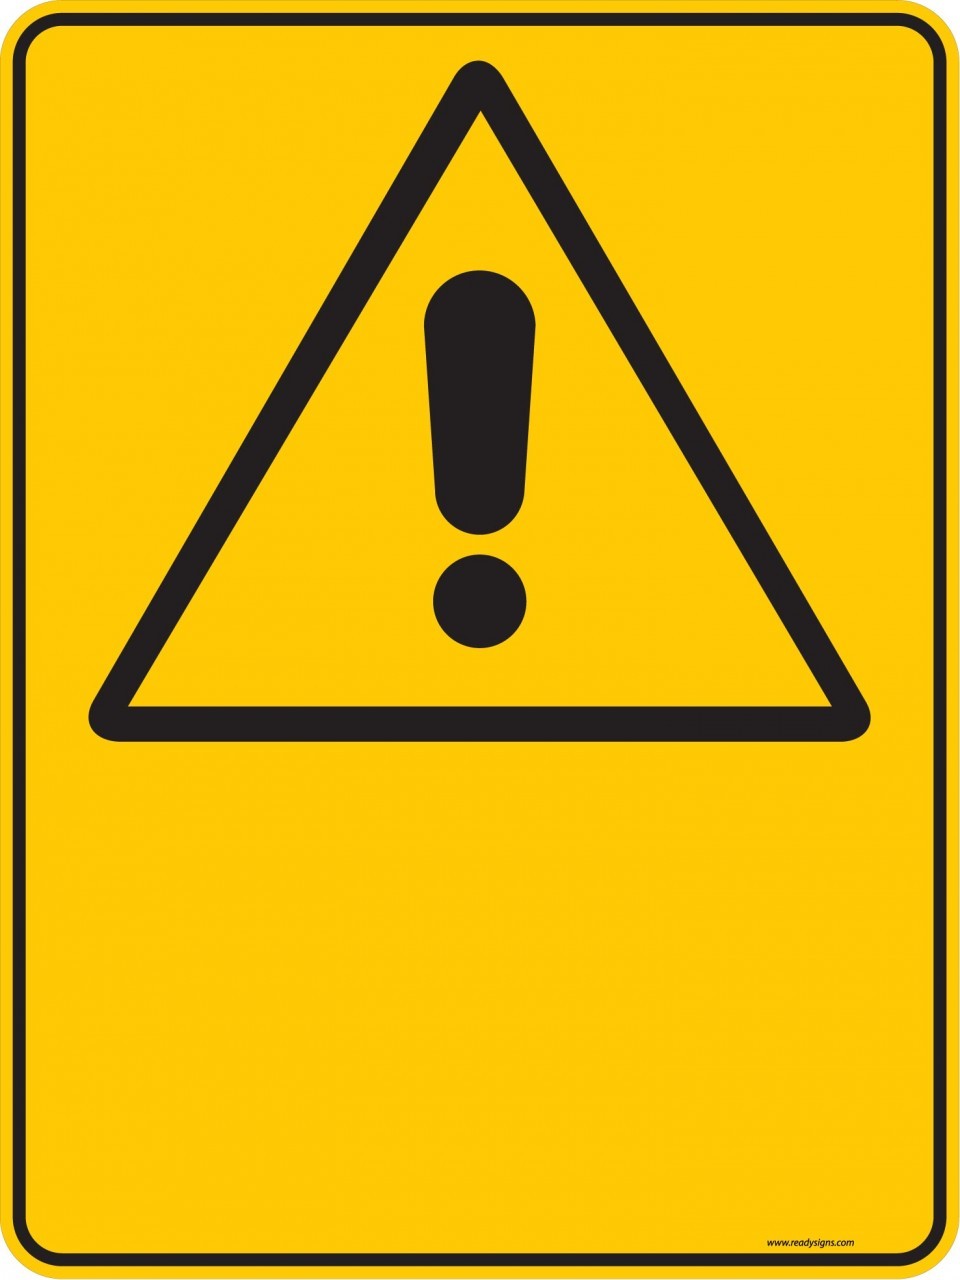 Warning Sign Template - ClipArt Best